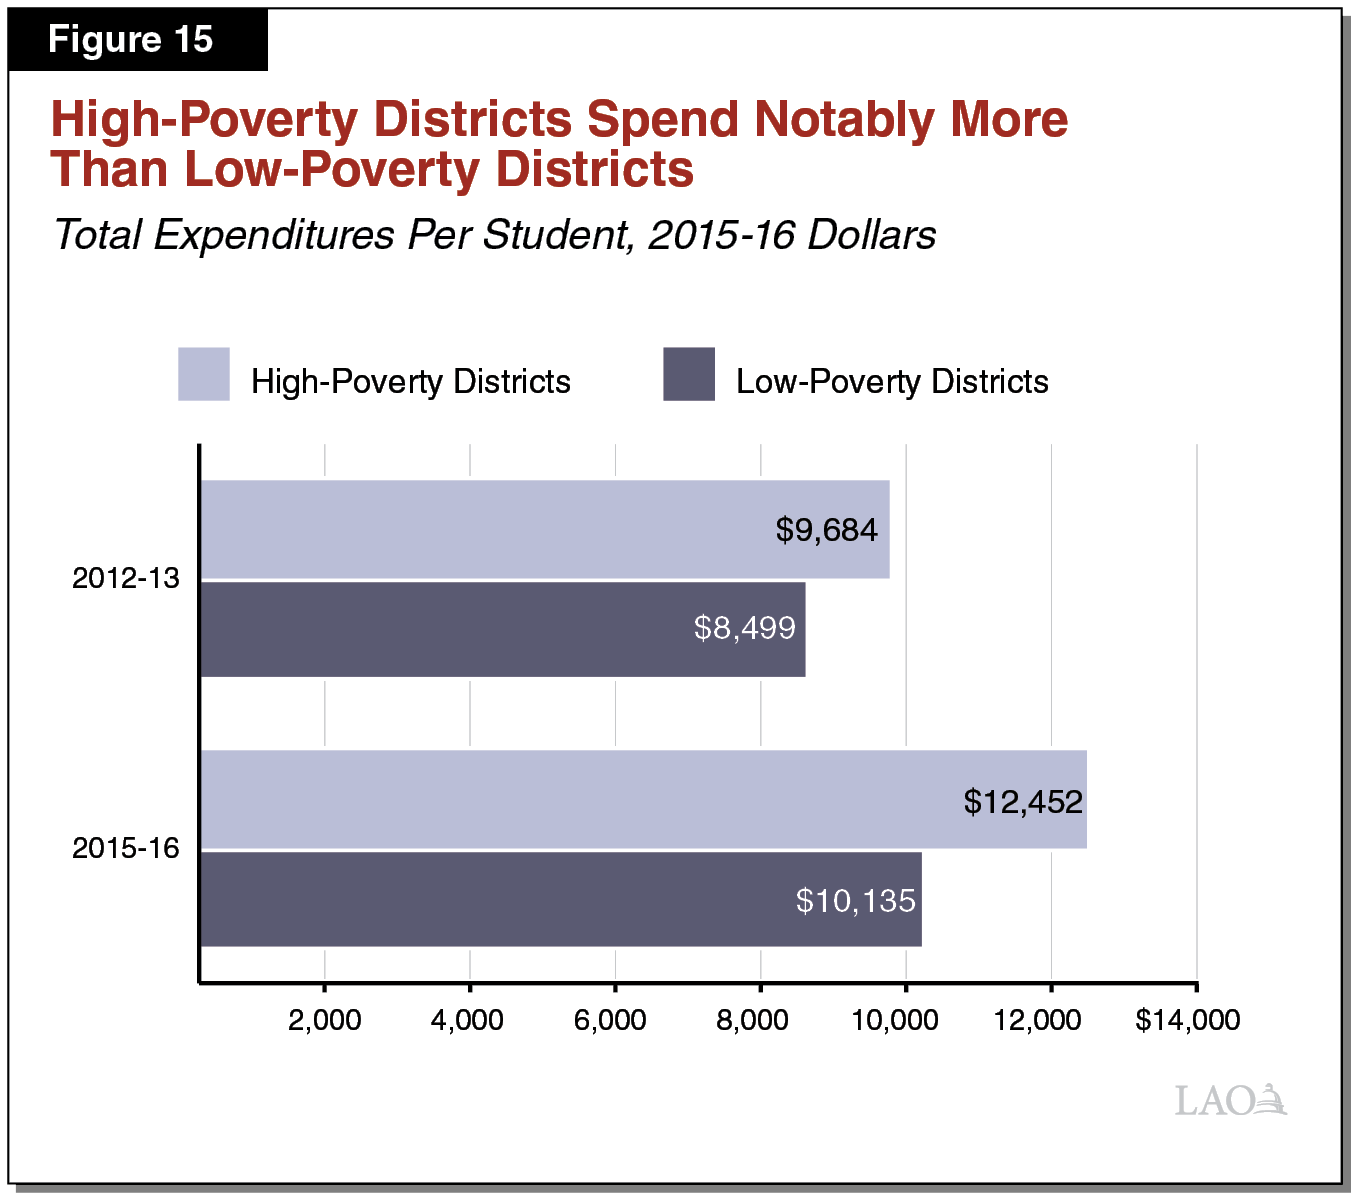 Figure 15 - High-Poverty Districts Spend Notably More than Low-Poverty Districts